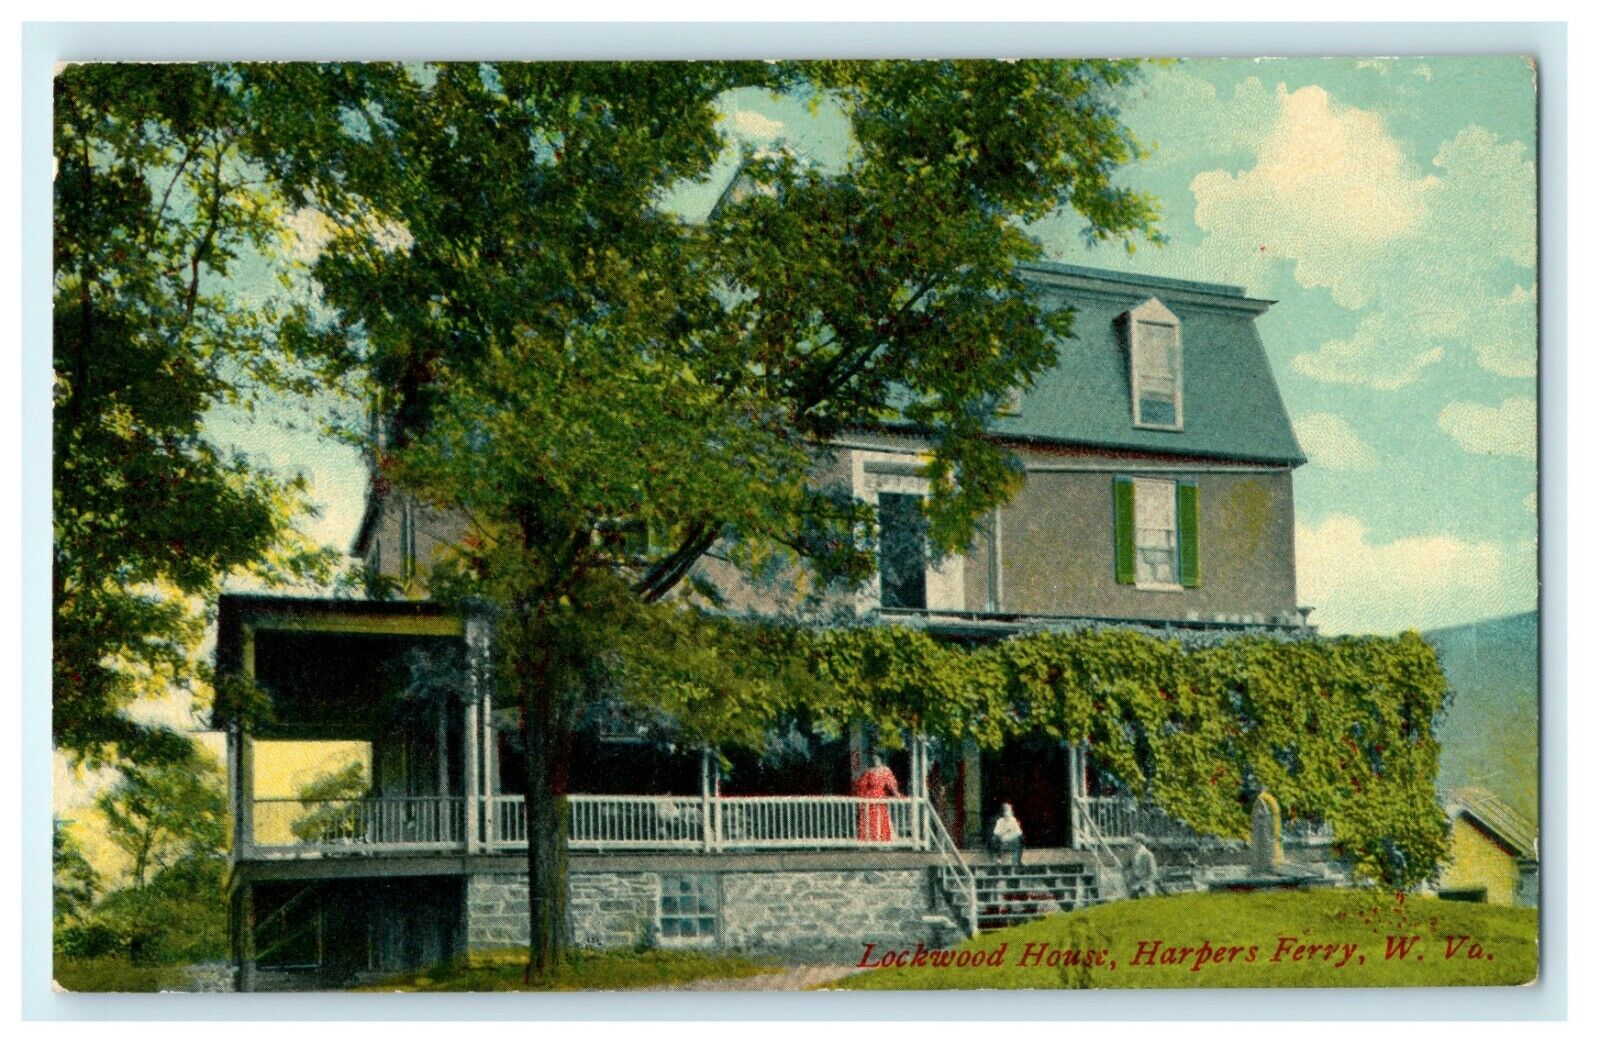 1909 Two Person at Lockwood House, Harpers Ferry West Virginia VA Postcard